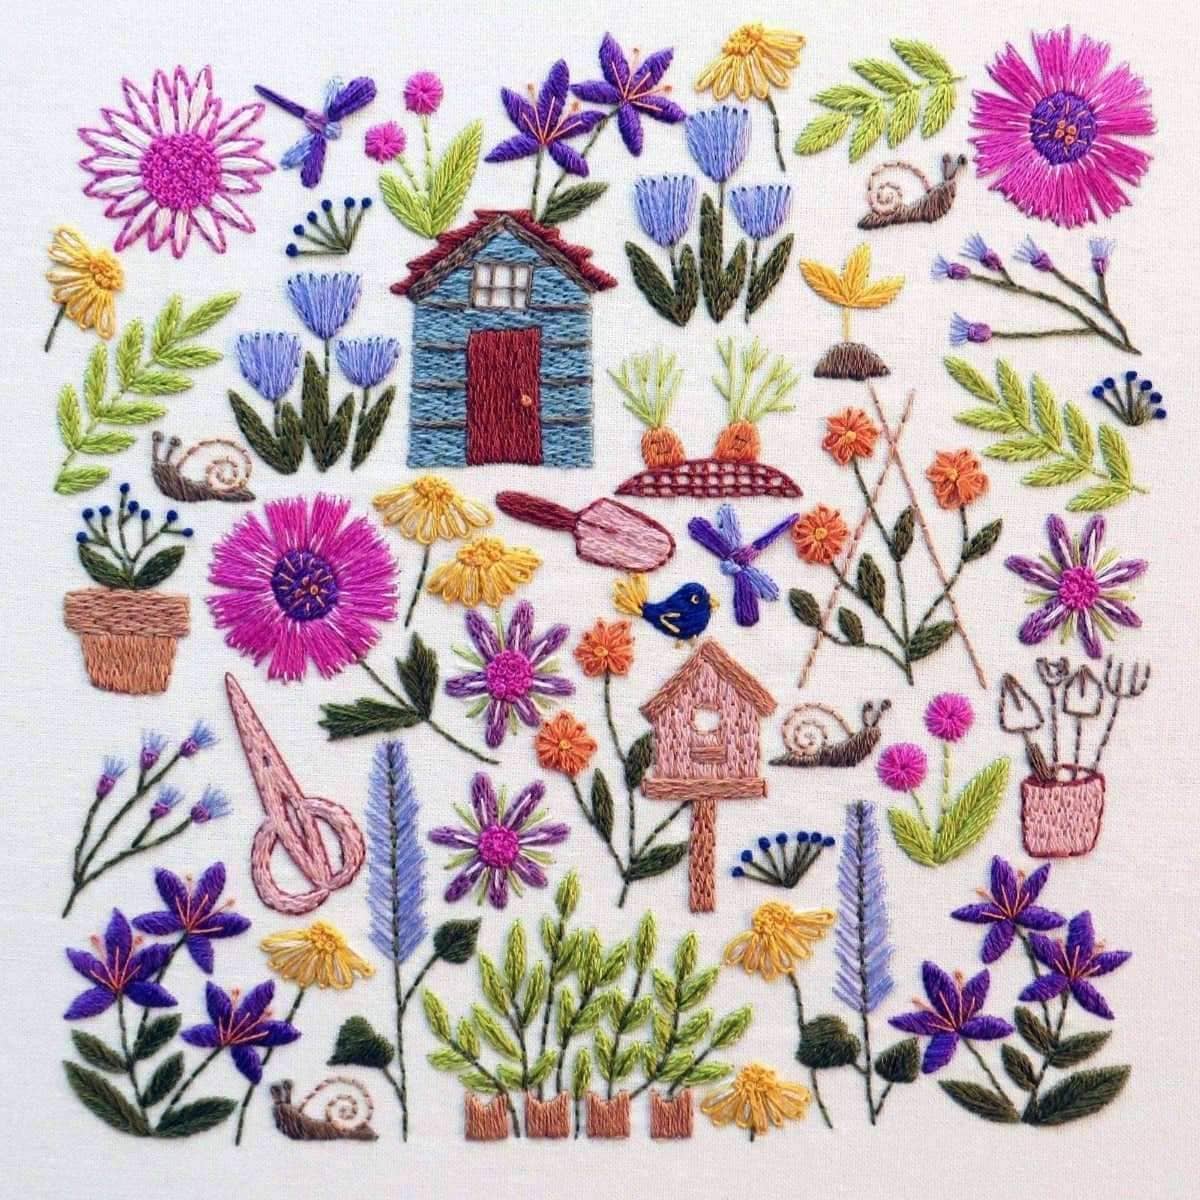 How does your Garden Grow Hand Embroidery Kit, Embroidery Kit, StitchDoodles, A Walk in the Woods - stitchdoodles, creative, Embroidery, embroidery hoop, Embroidery Kit, embroidery pattern, garden embroidery, hand embroidery, hand embroidery fabric, hand embroidery kit, hand embroidery seat frame, nurge embroidery hoop, nurge square hoops, pattern, patterns, Printed Pattern, StitchDoodles, stitched, stitching, wildlife embroidery, StitchDoodles, shop.stitchdoodles.com